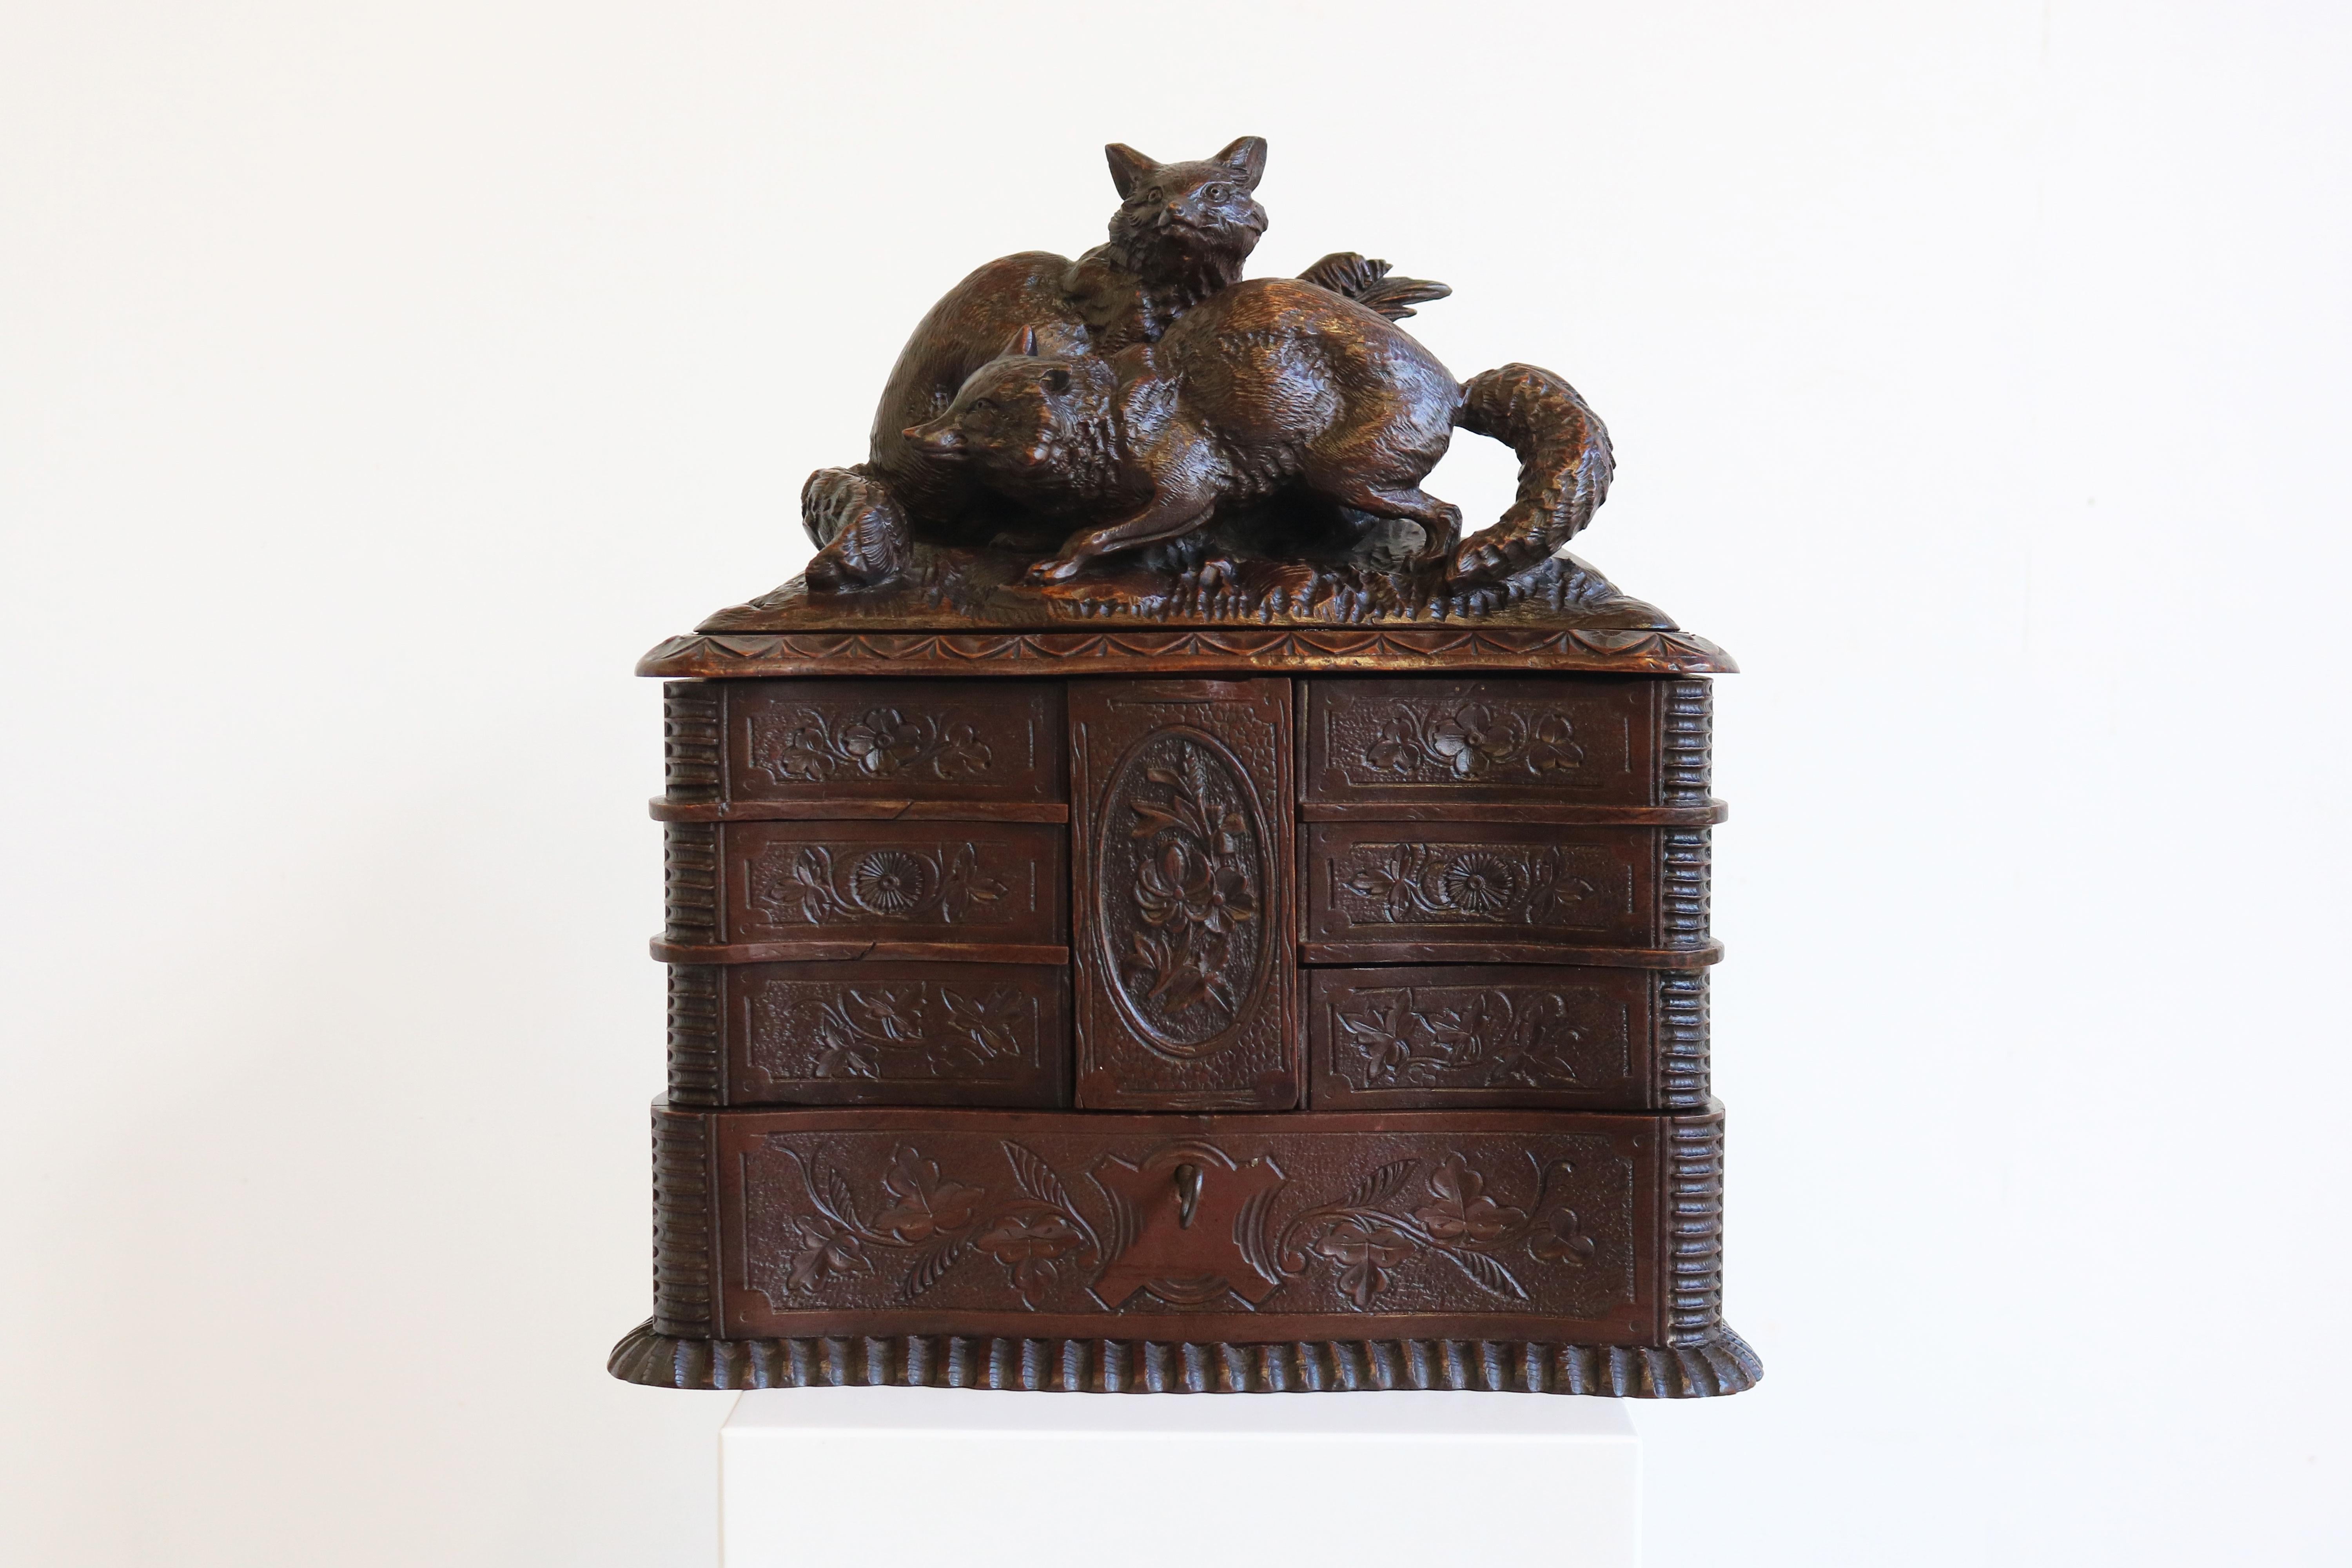 Rare Antique 4 Tier Black Forest Jewelry Box Fruitwood 19th Century Hand Carved For Sale 12